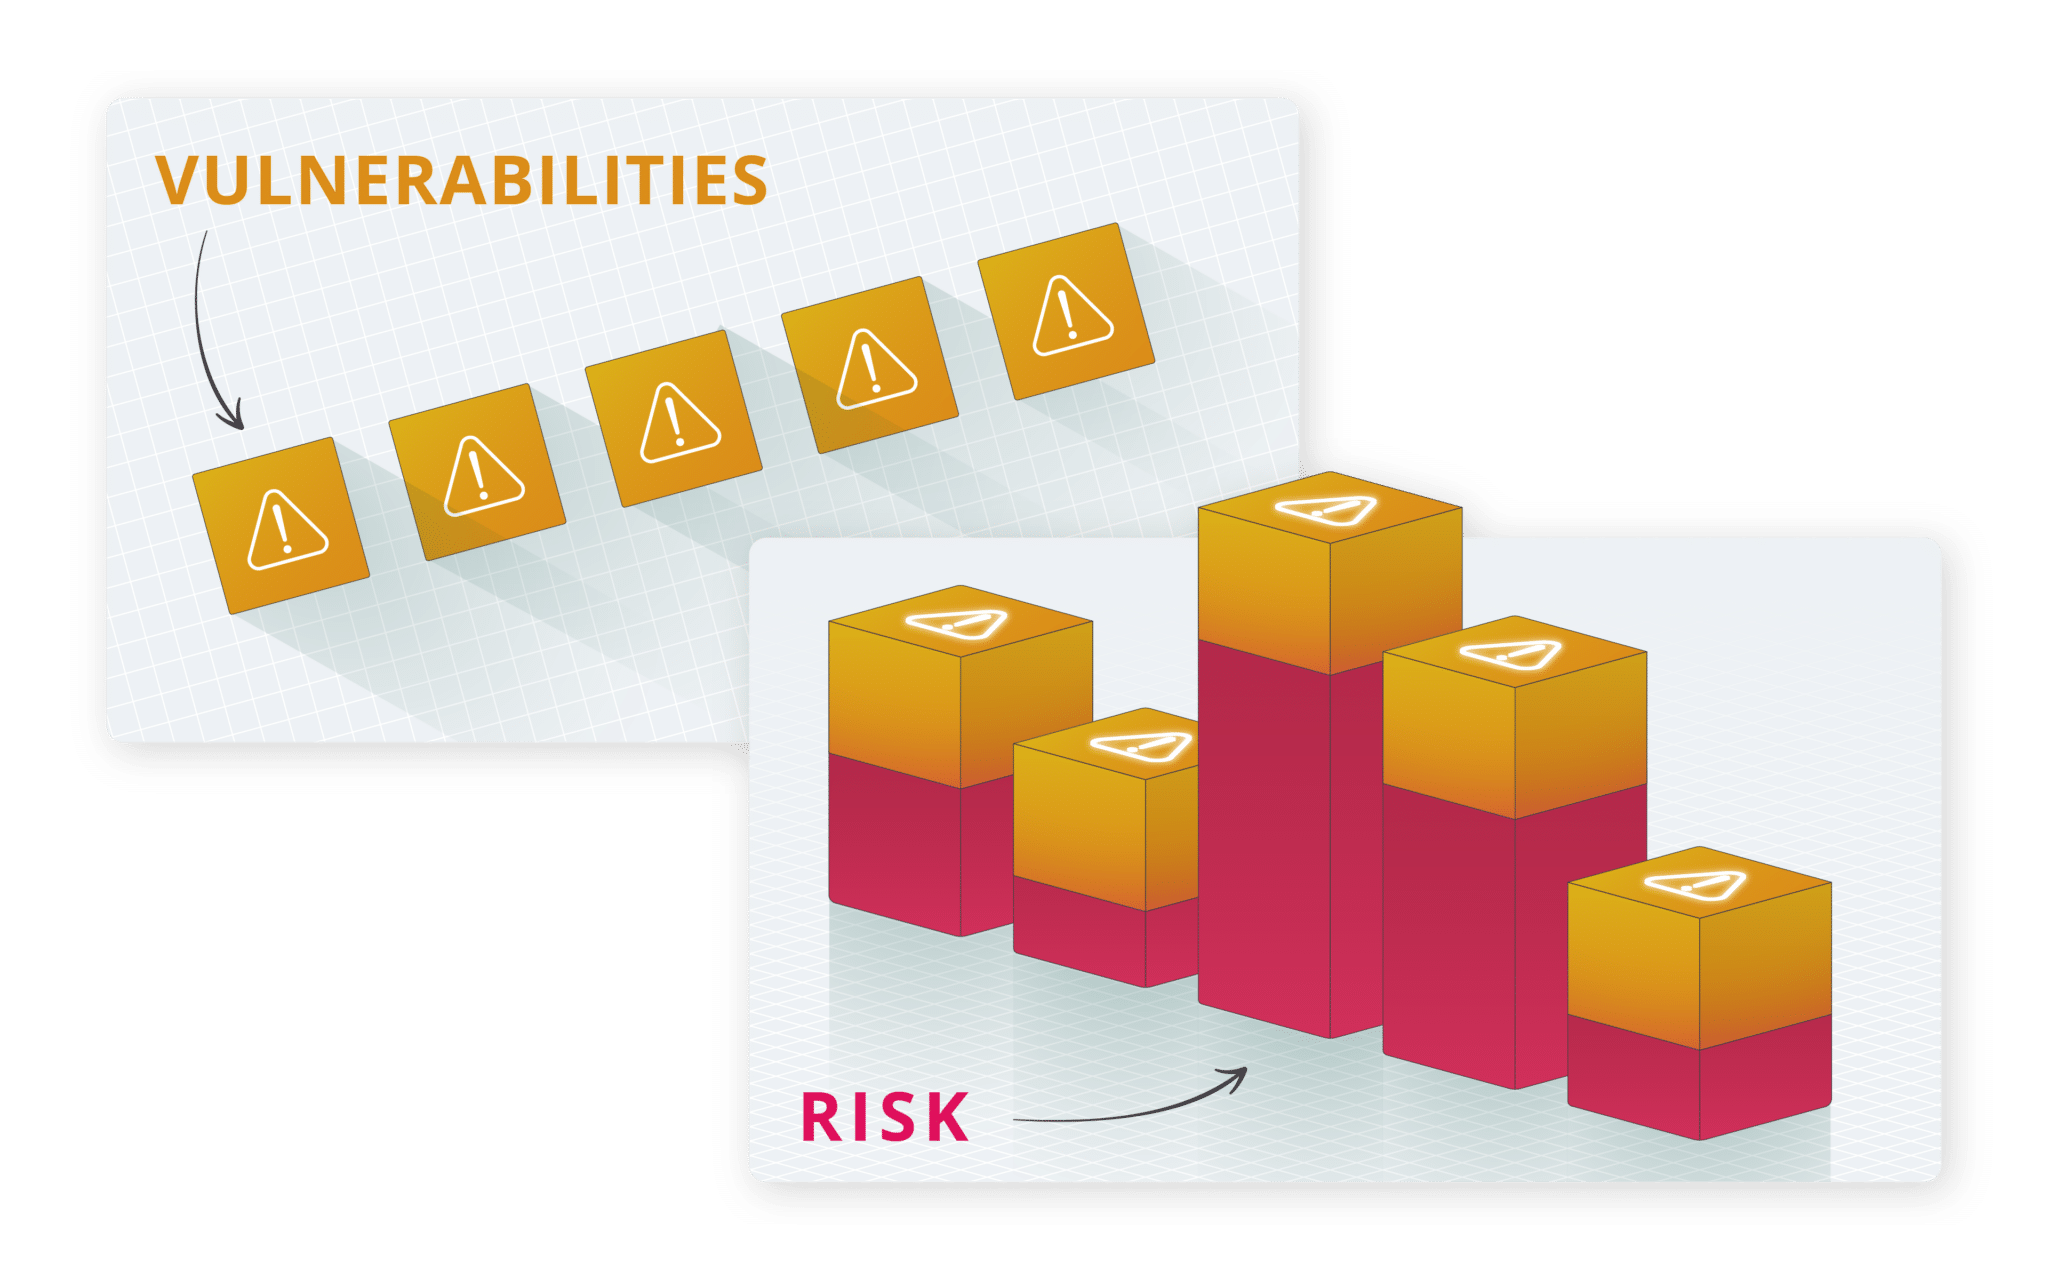 A 2d view of vulnerabilities changes to a 3d view, showing they have different levels of underlying risk.